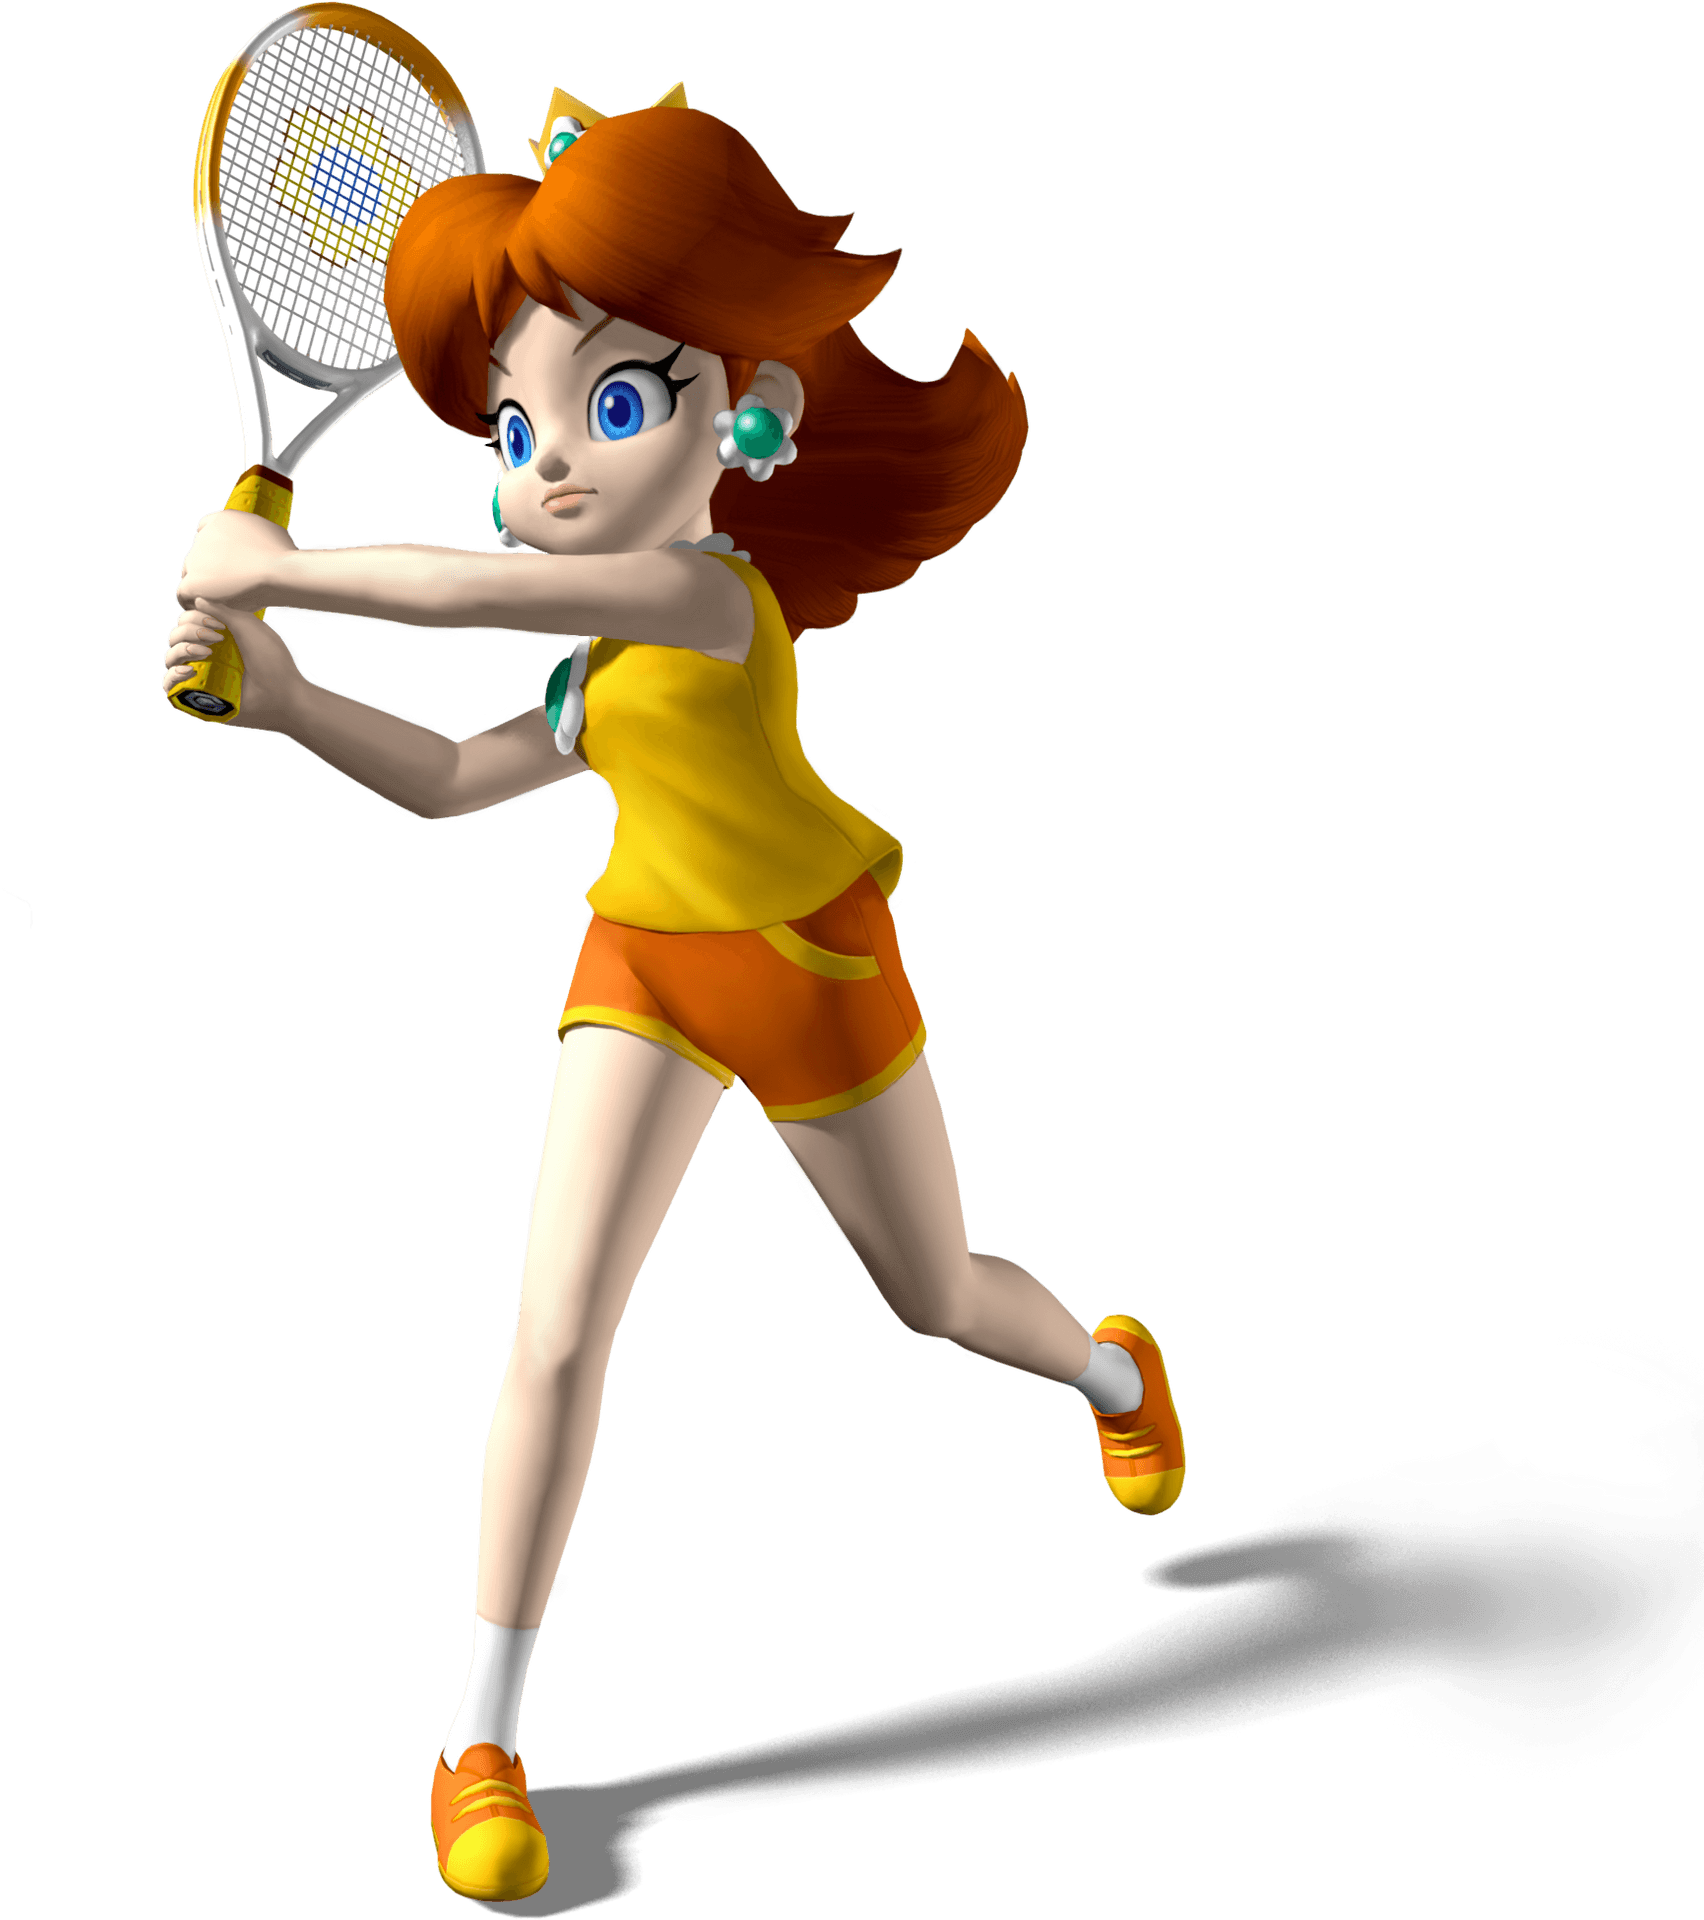 Animated Tennis Player Action Pose PNG